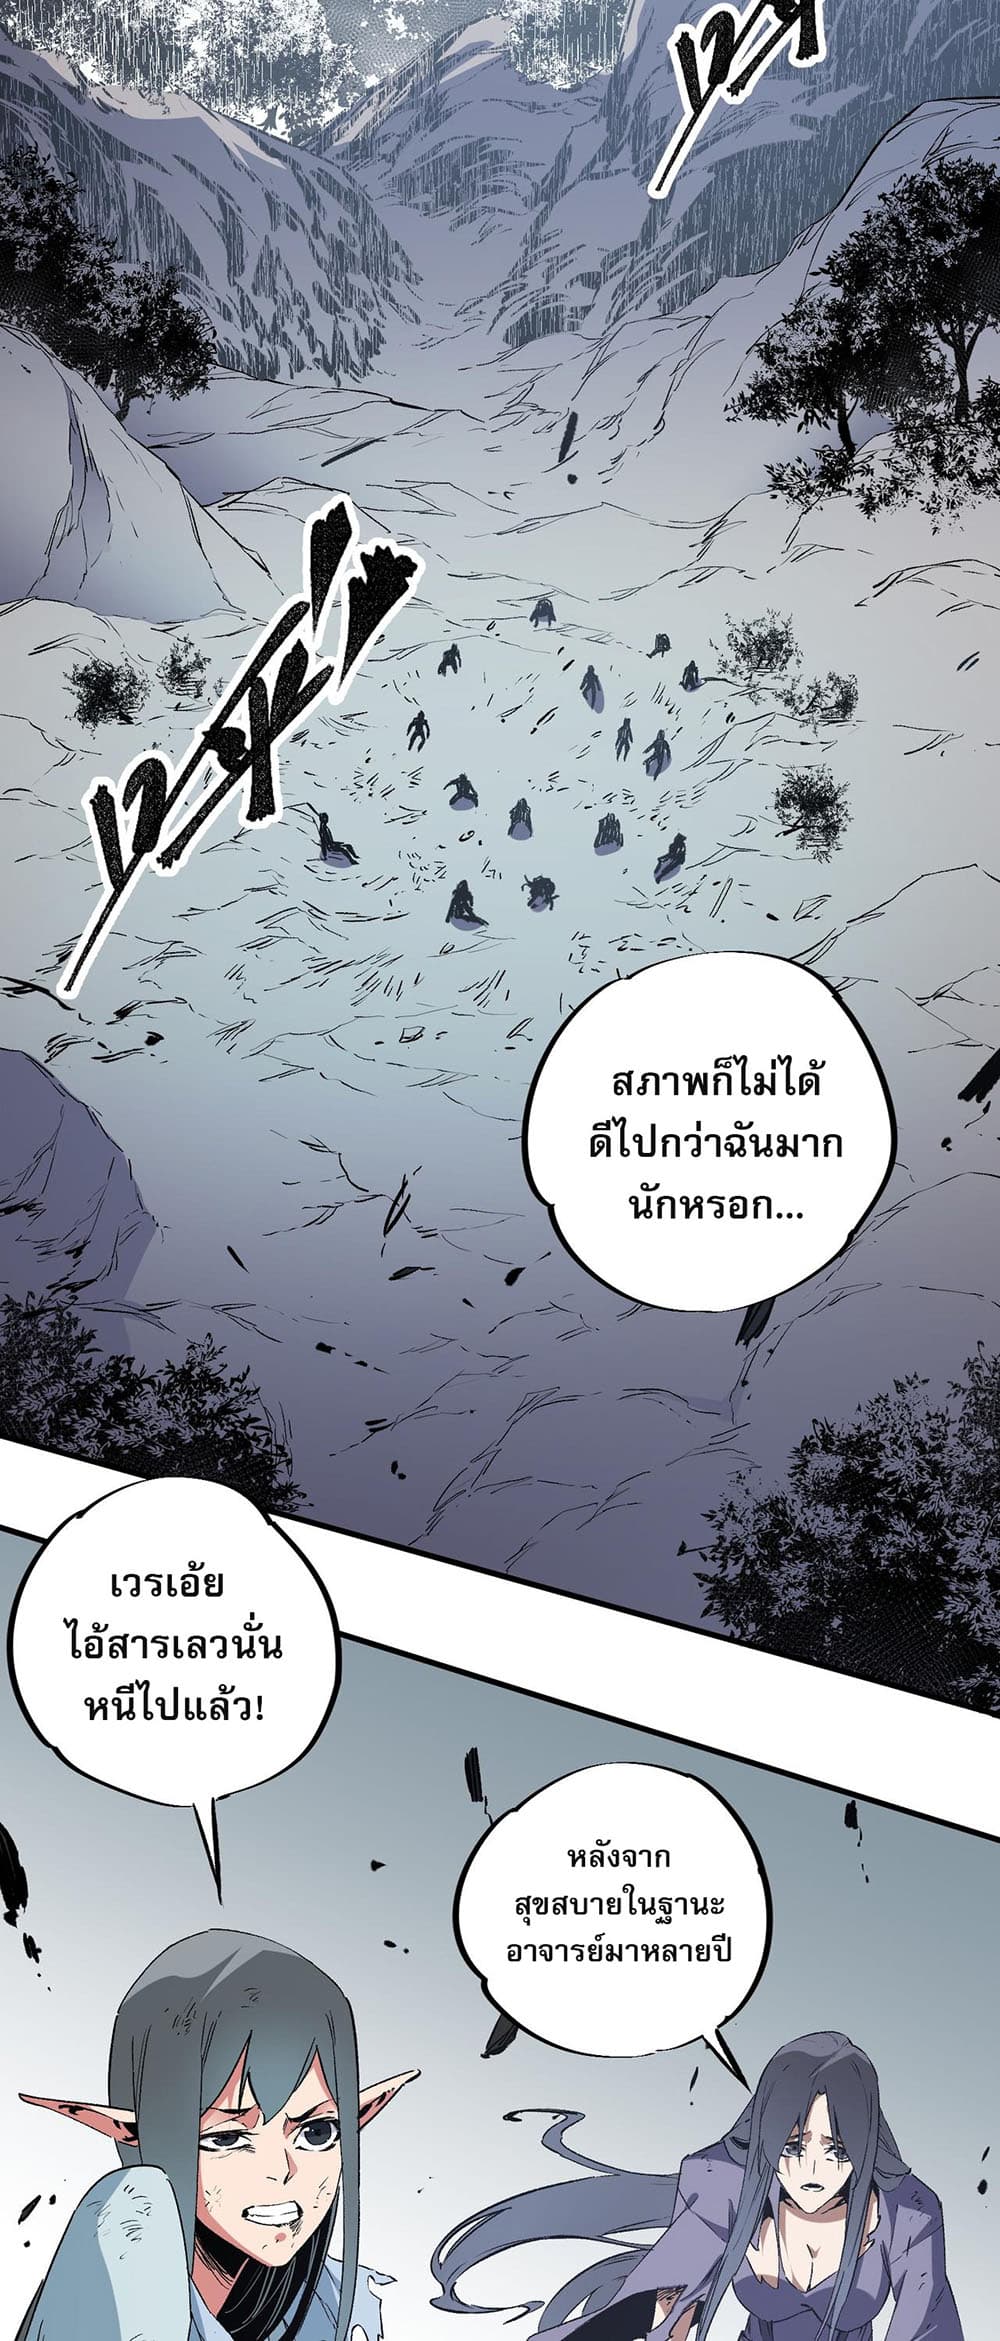 Job Changing for the Entire Population: The Jobless Me Will Terminate the Gods ฉันคือผู้เล่นไร้อาชีพที่สังหารเหล่าเทพ 54-54